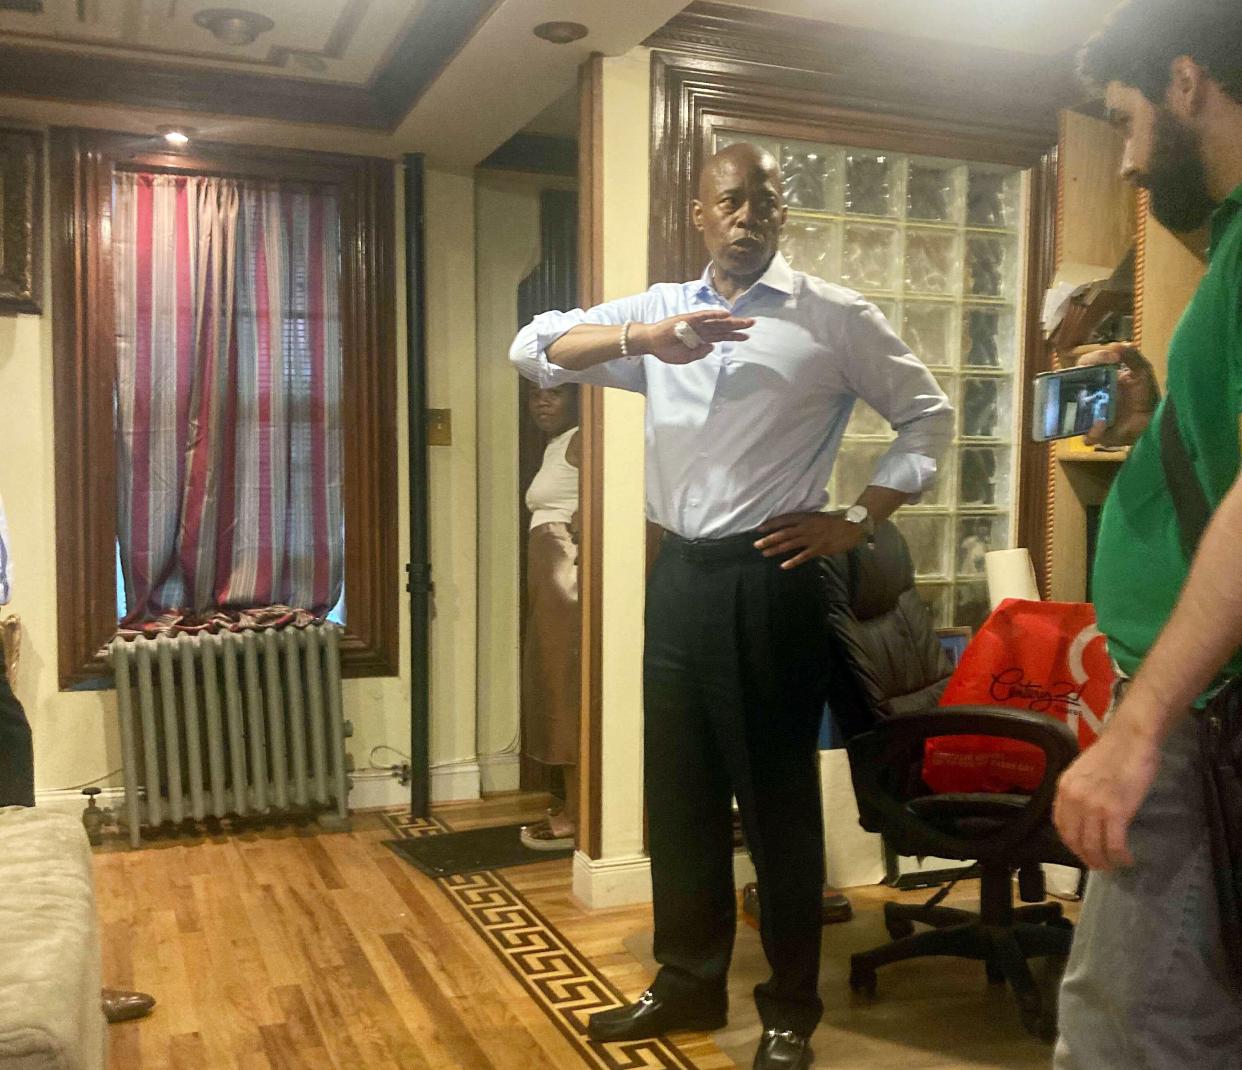 Then-mayoral candidate Eric Adams invited reporters on June 9, 2021, to tour his ground-floor home in the Bedford-Stuyvesant neighborhood of Brooklyn.